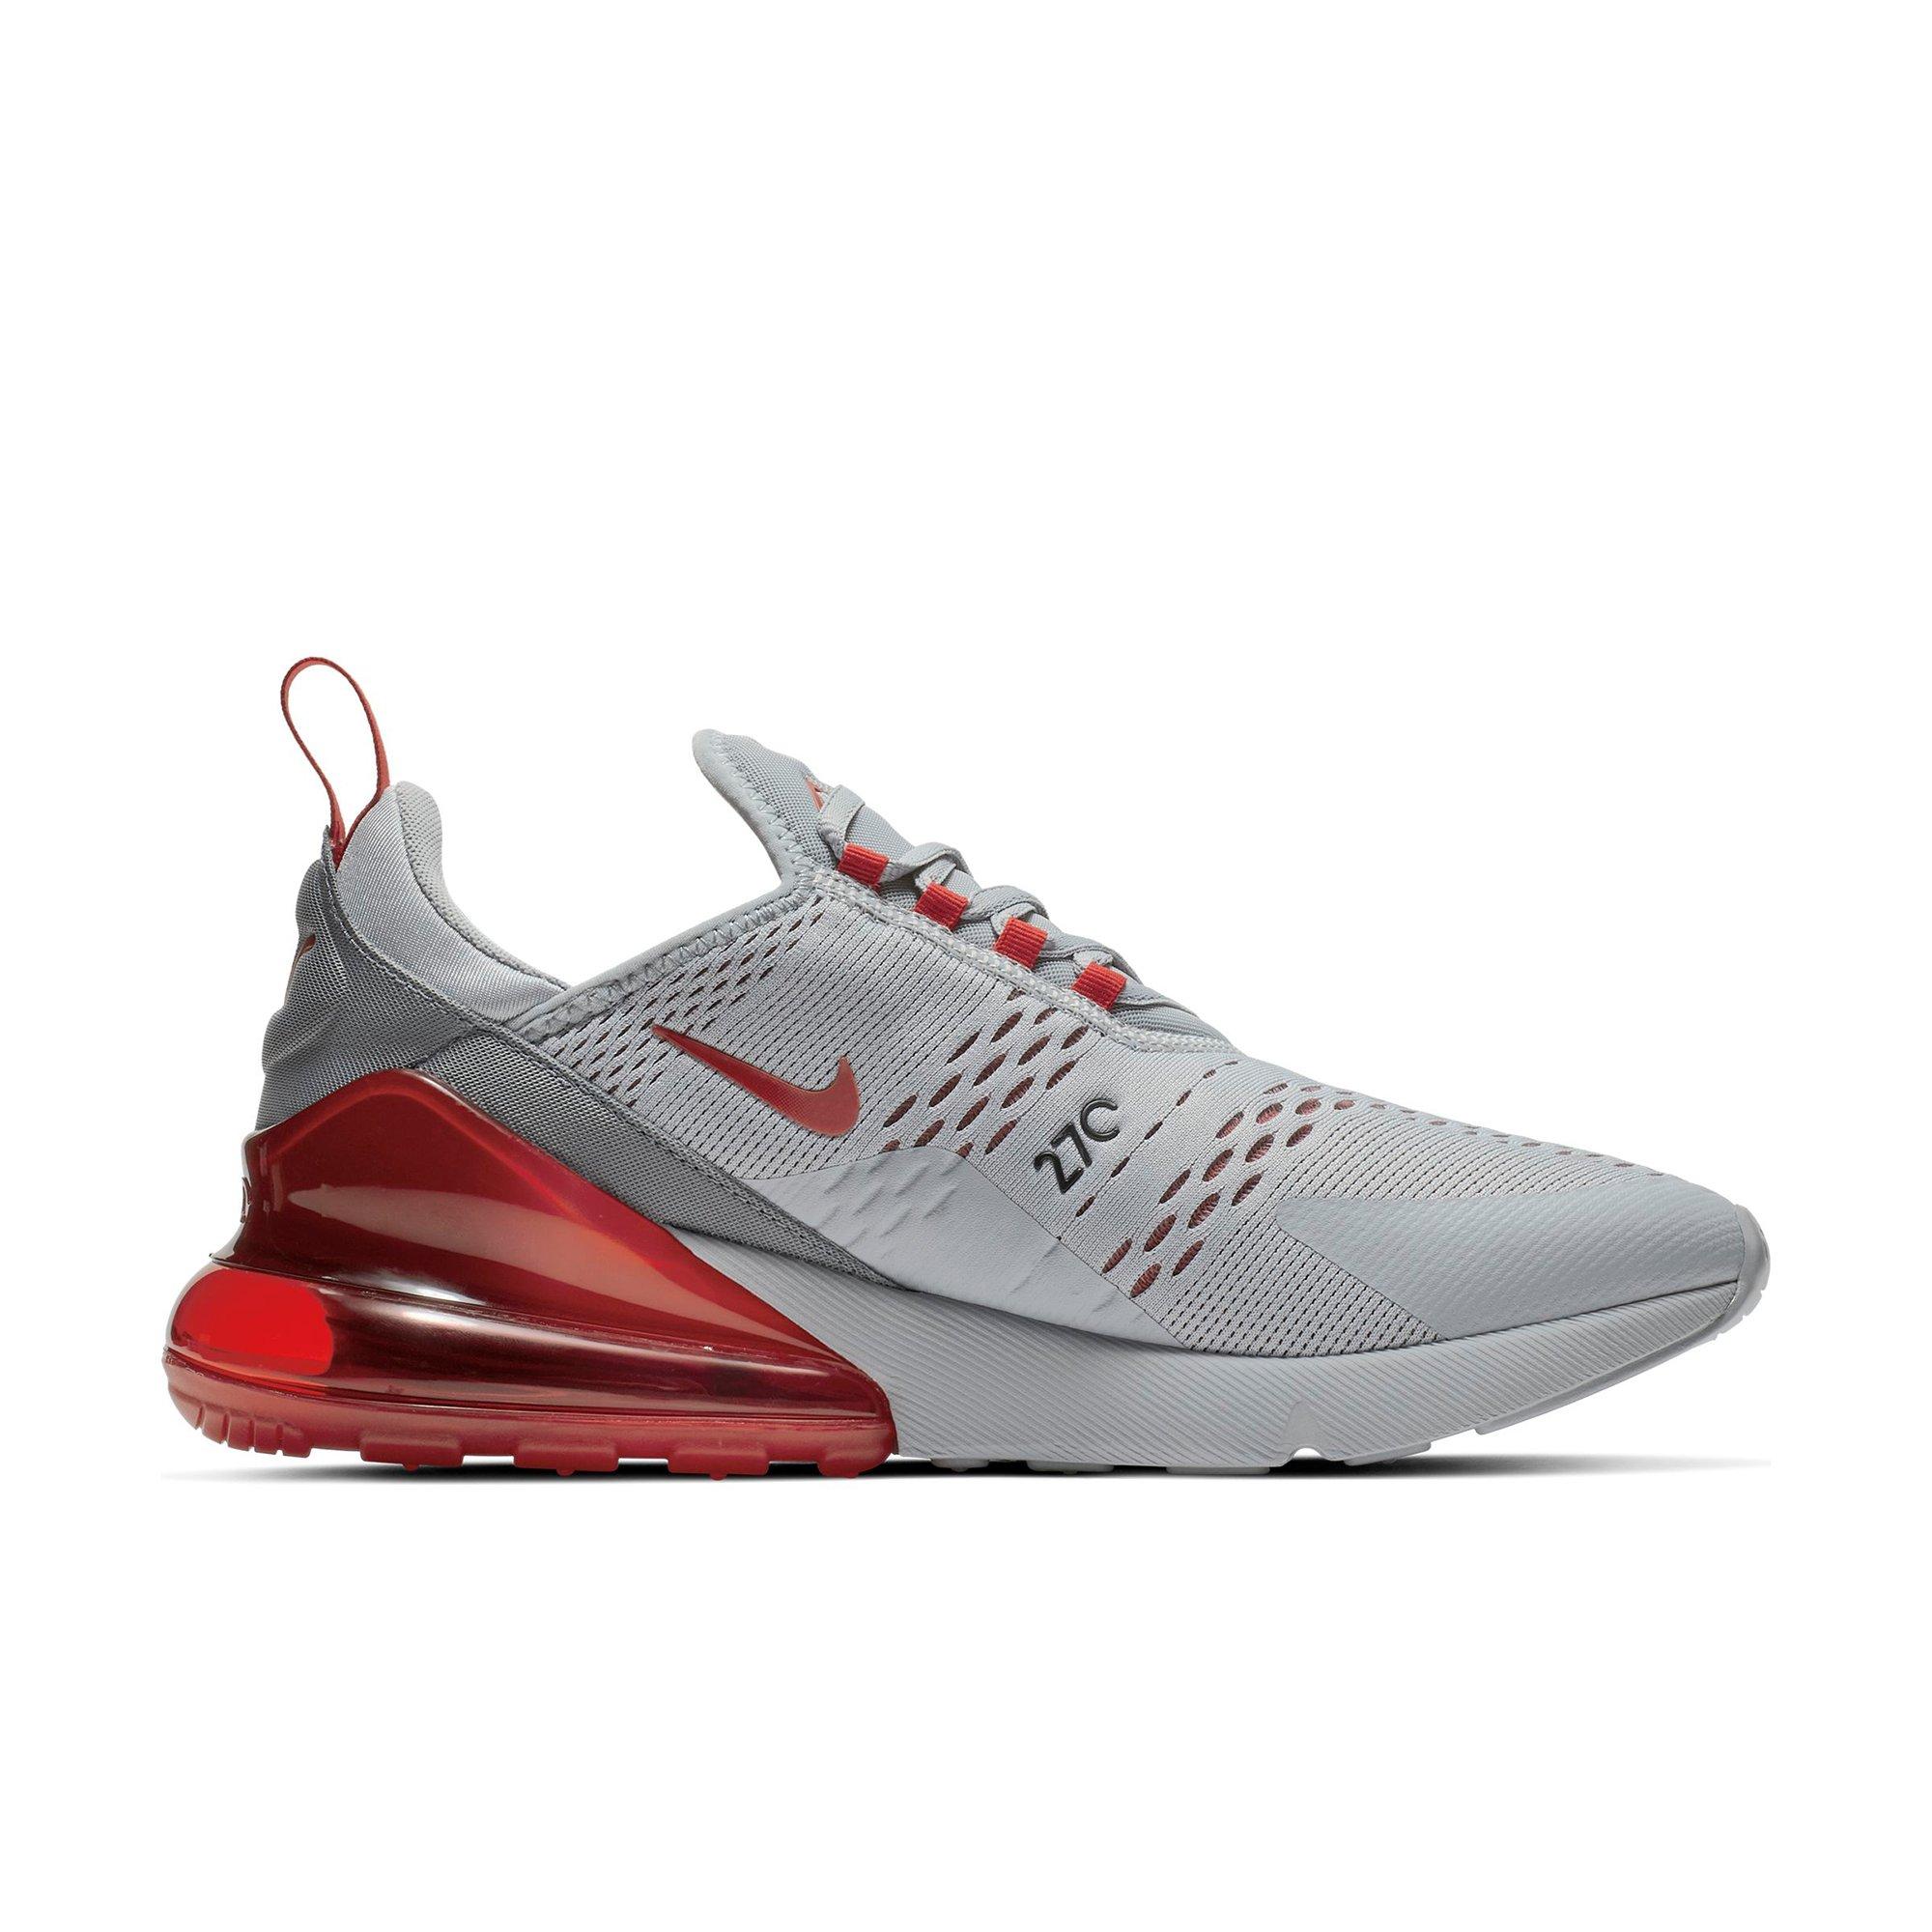 grey and red 270s